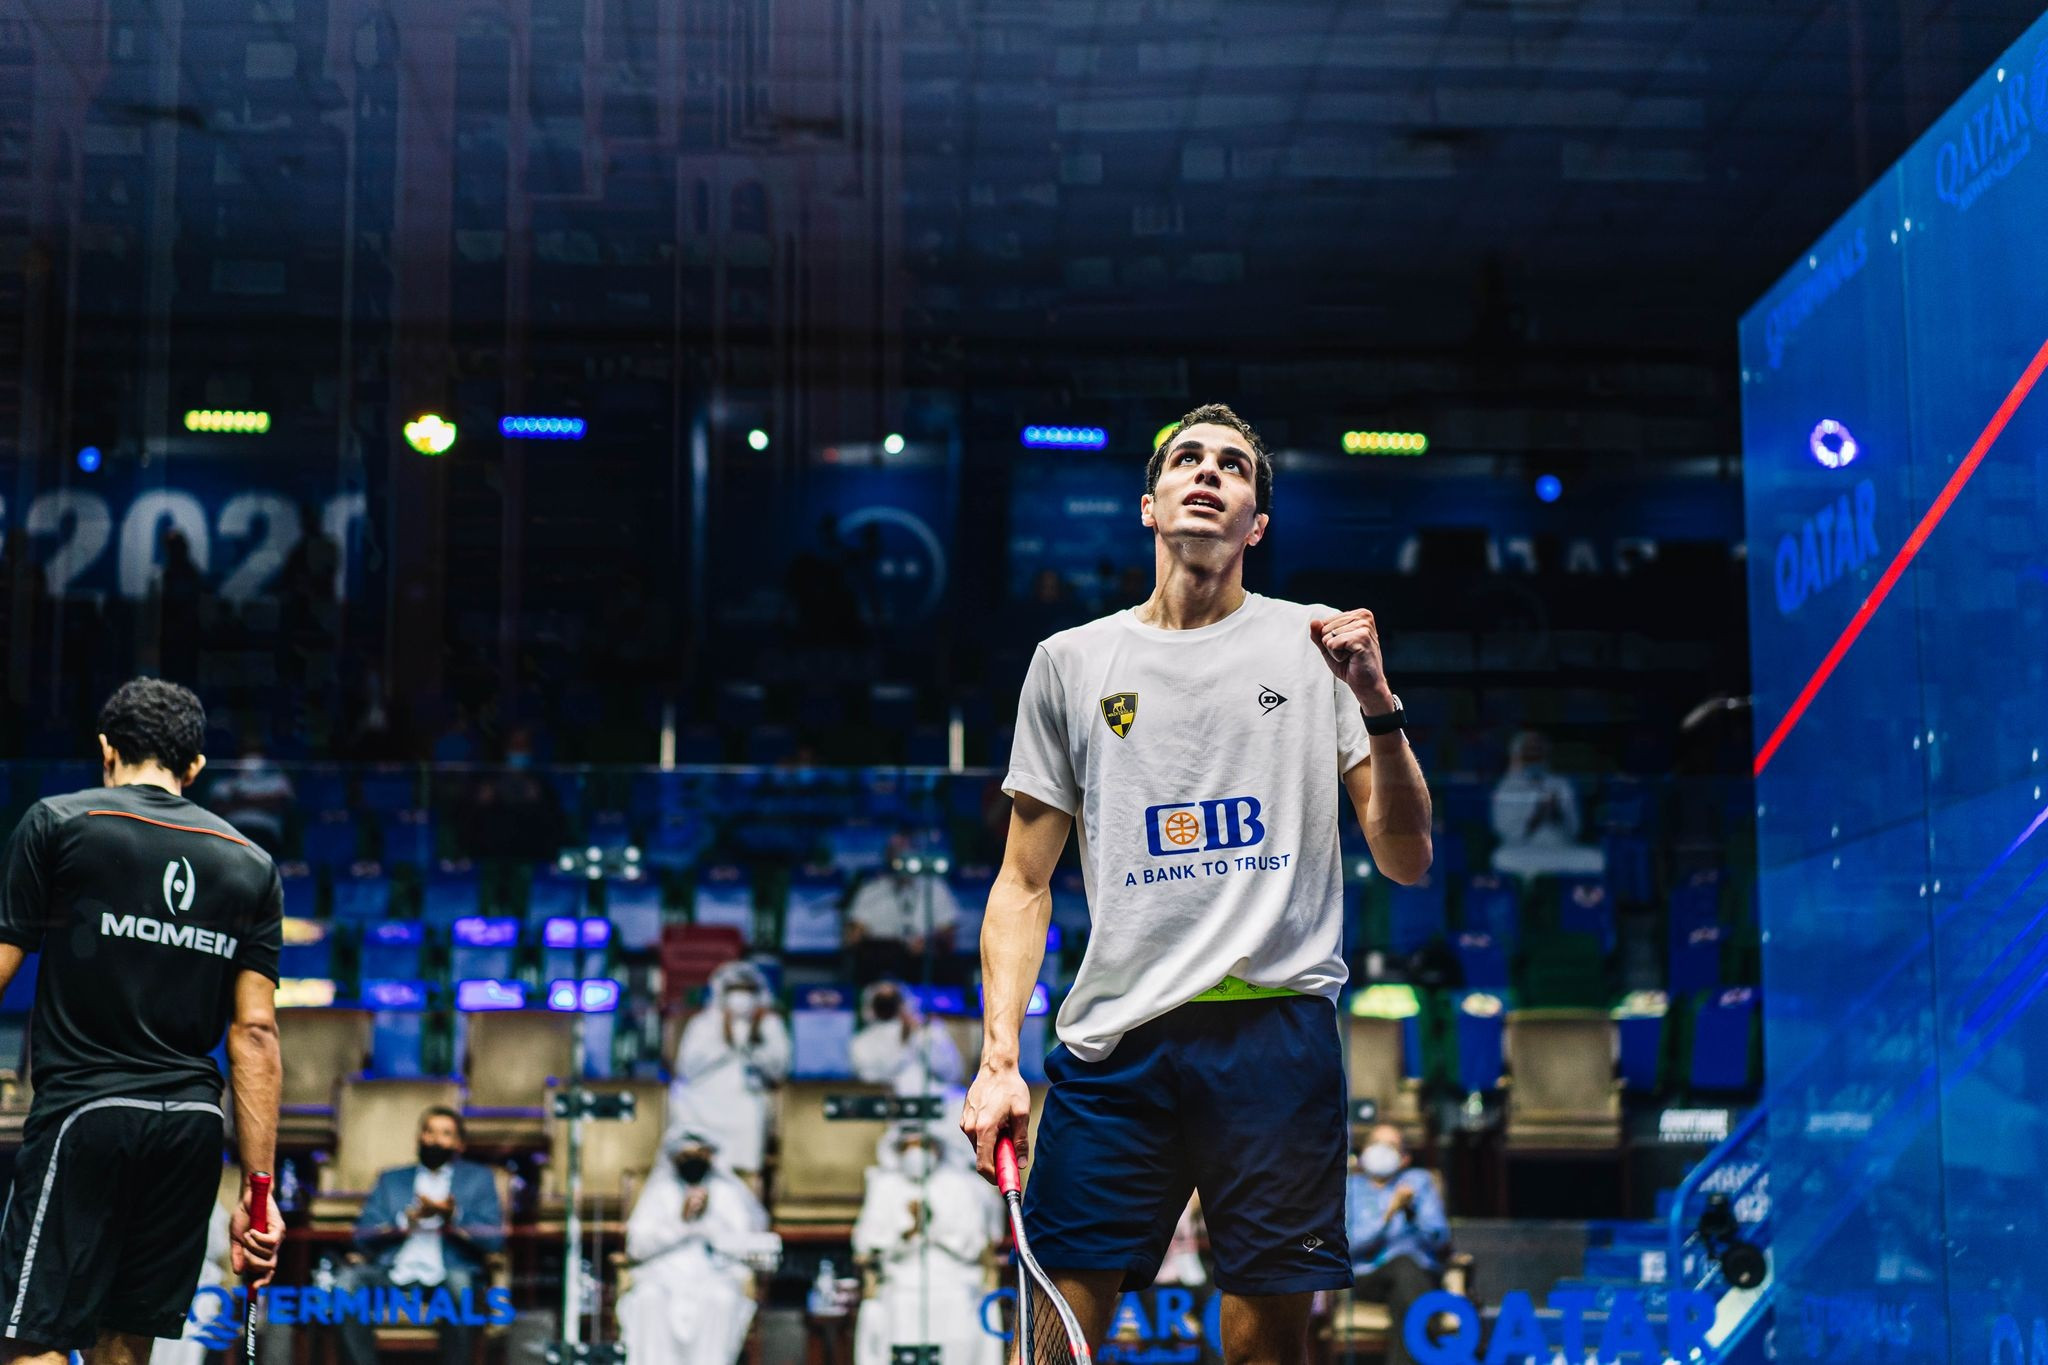 Farag and Coll to meet in PSA Qatar Classic final after dominant last-four wins 